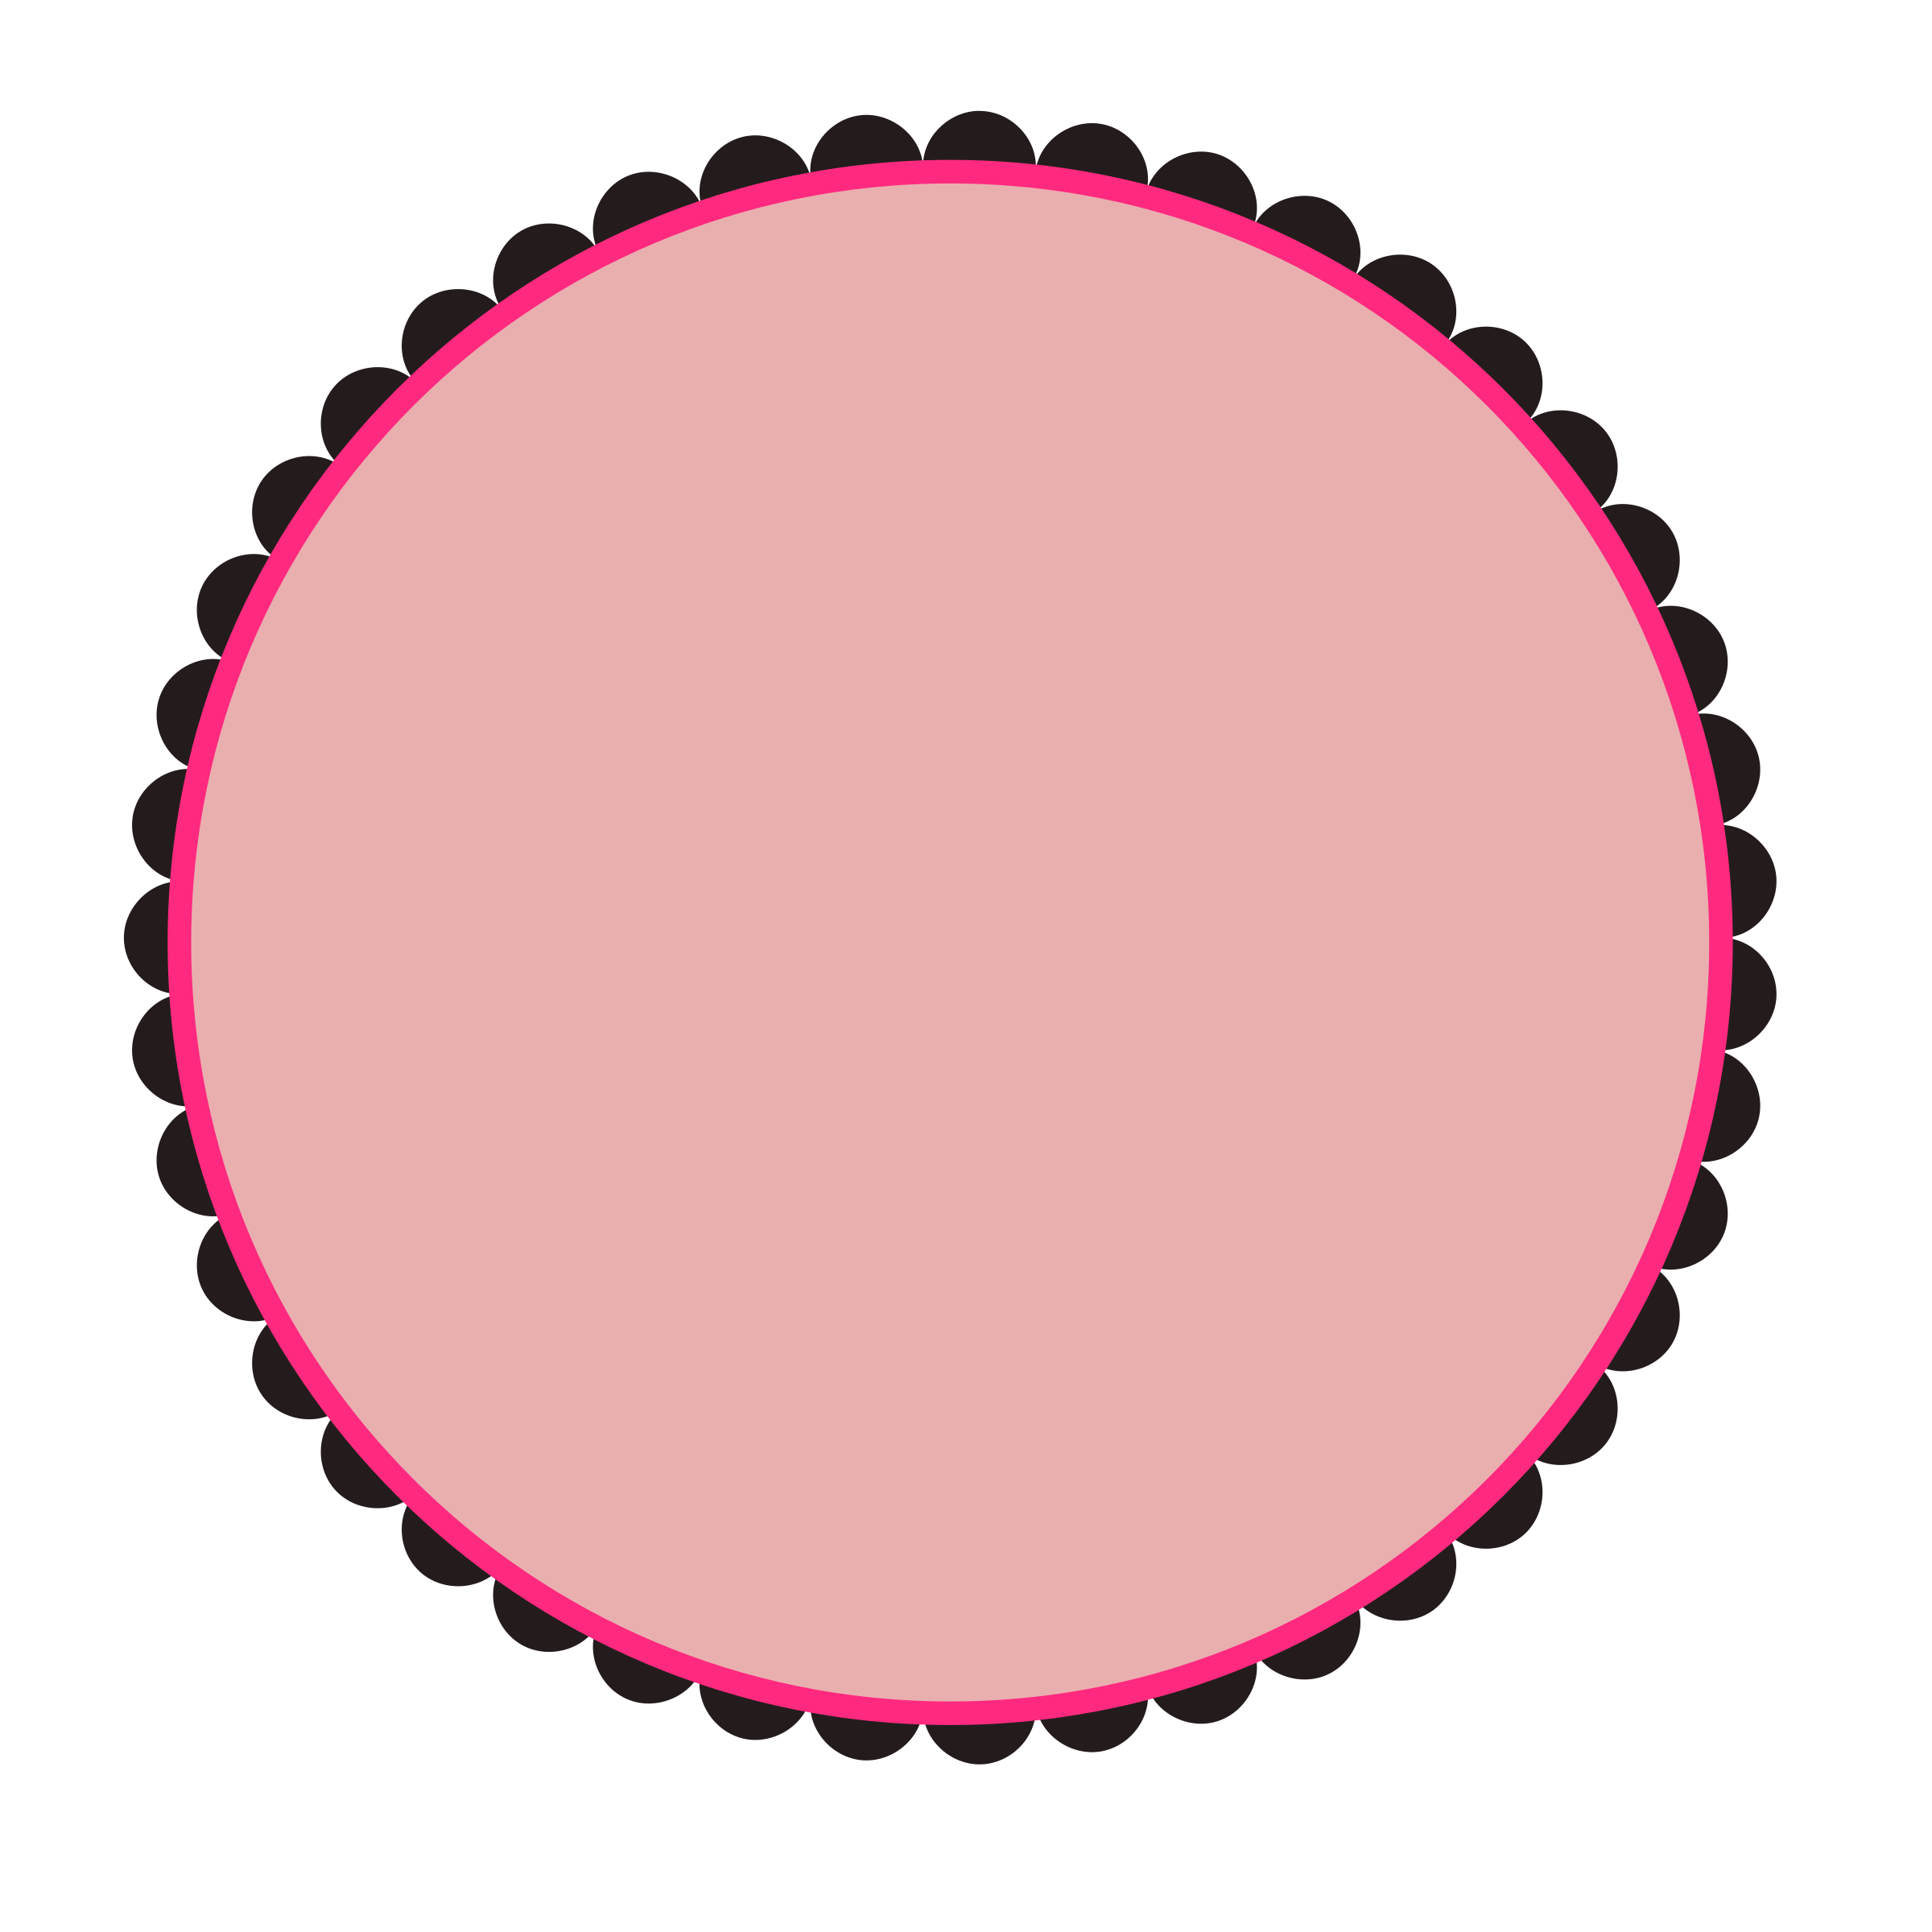 Round Picture Frame Png